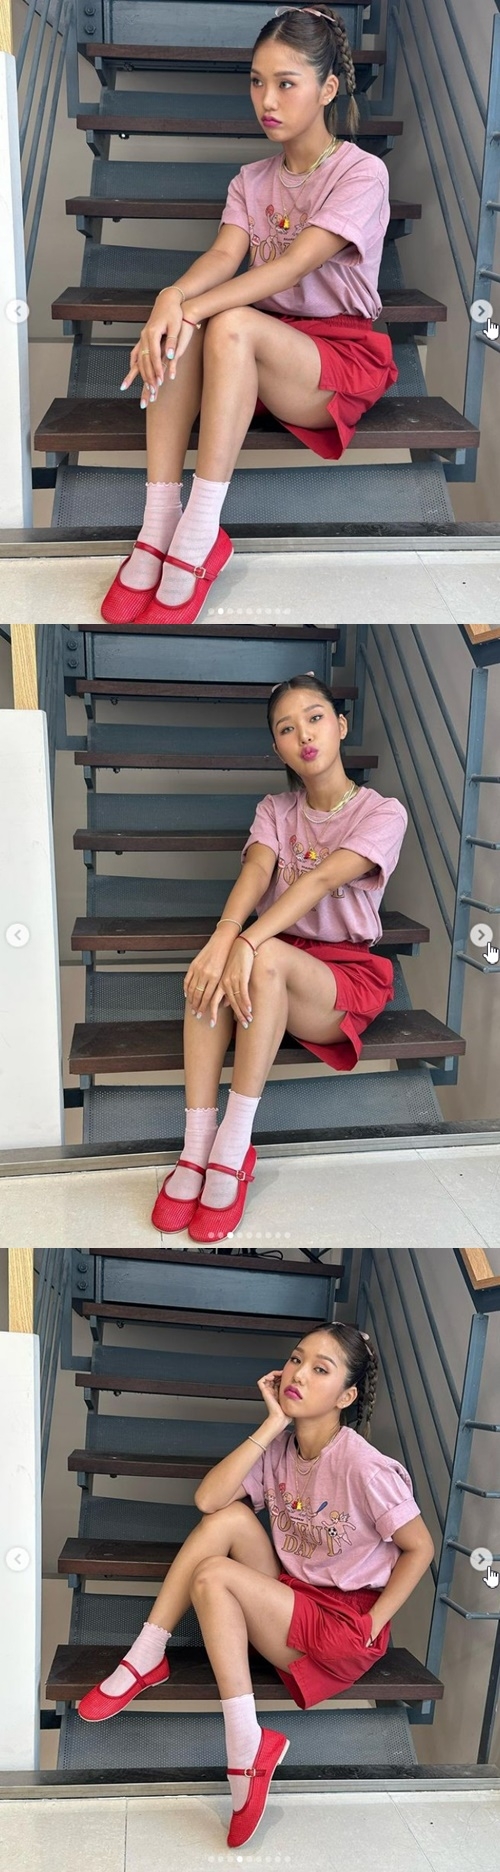 OH MY GIRL Mimi has released a selfie.Mimi posted several photos on her SNS with heart emoticons on the 1st.In the public photos, Mimi took various poses on the stairs.He also took a posh pose and stretched his legs all the way to show off his pose.Meanwhile, Mimi is currently appearing on Arcade2.In addition, OH MY GIRL, which Mimi belongs to, raised expectations by anticipating a complete Come Back.Son Jin!